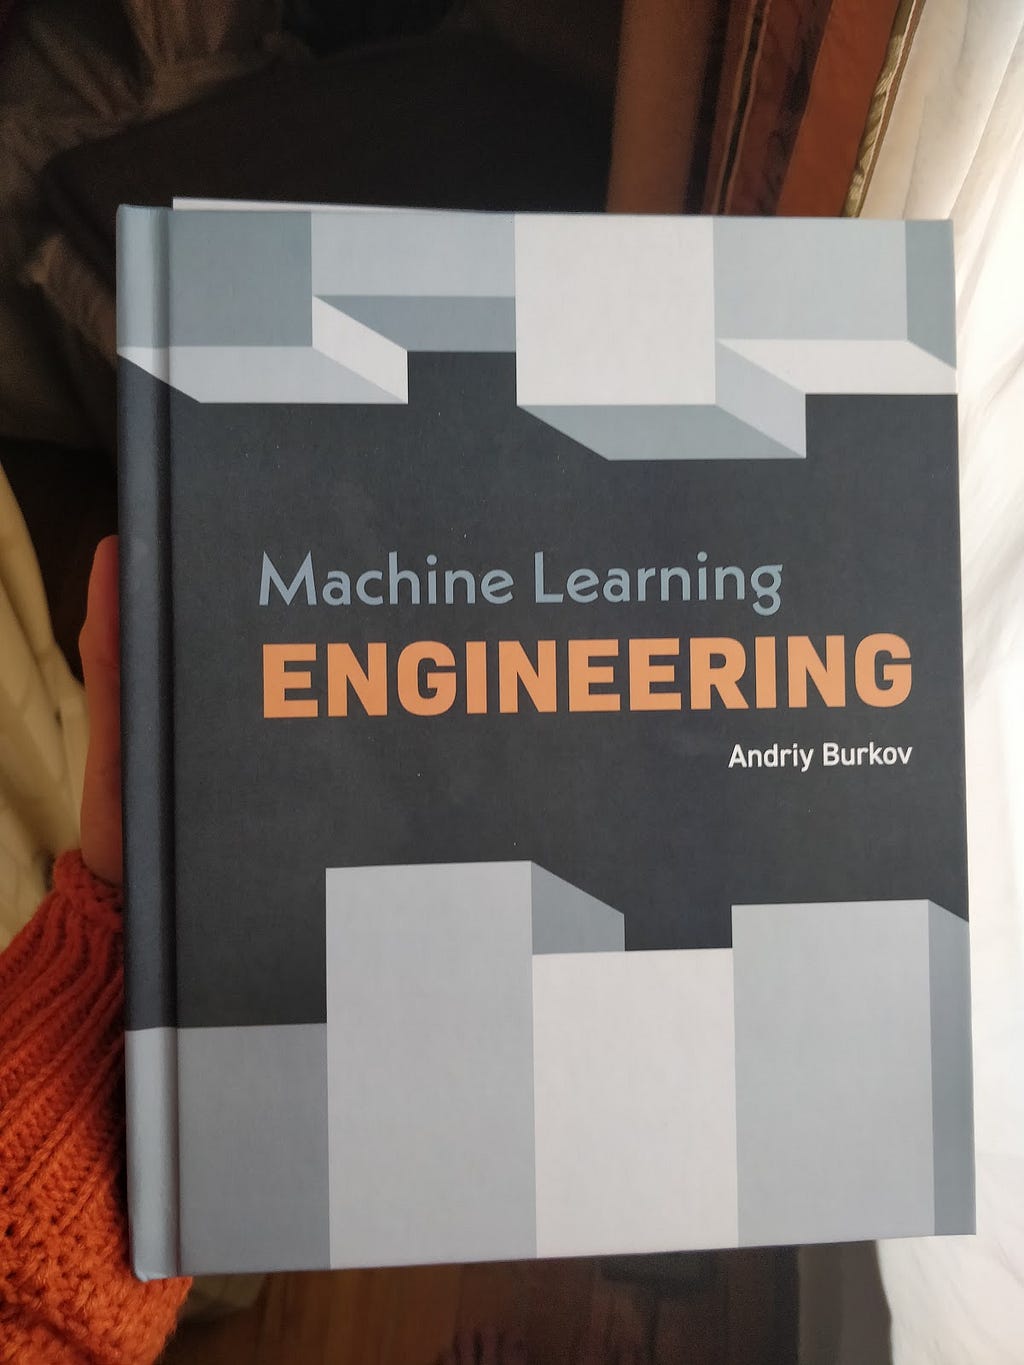 Machine Learning Engineering by Andriy Burkov — great reading for anyone interesting in ML systems!